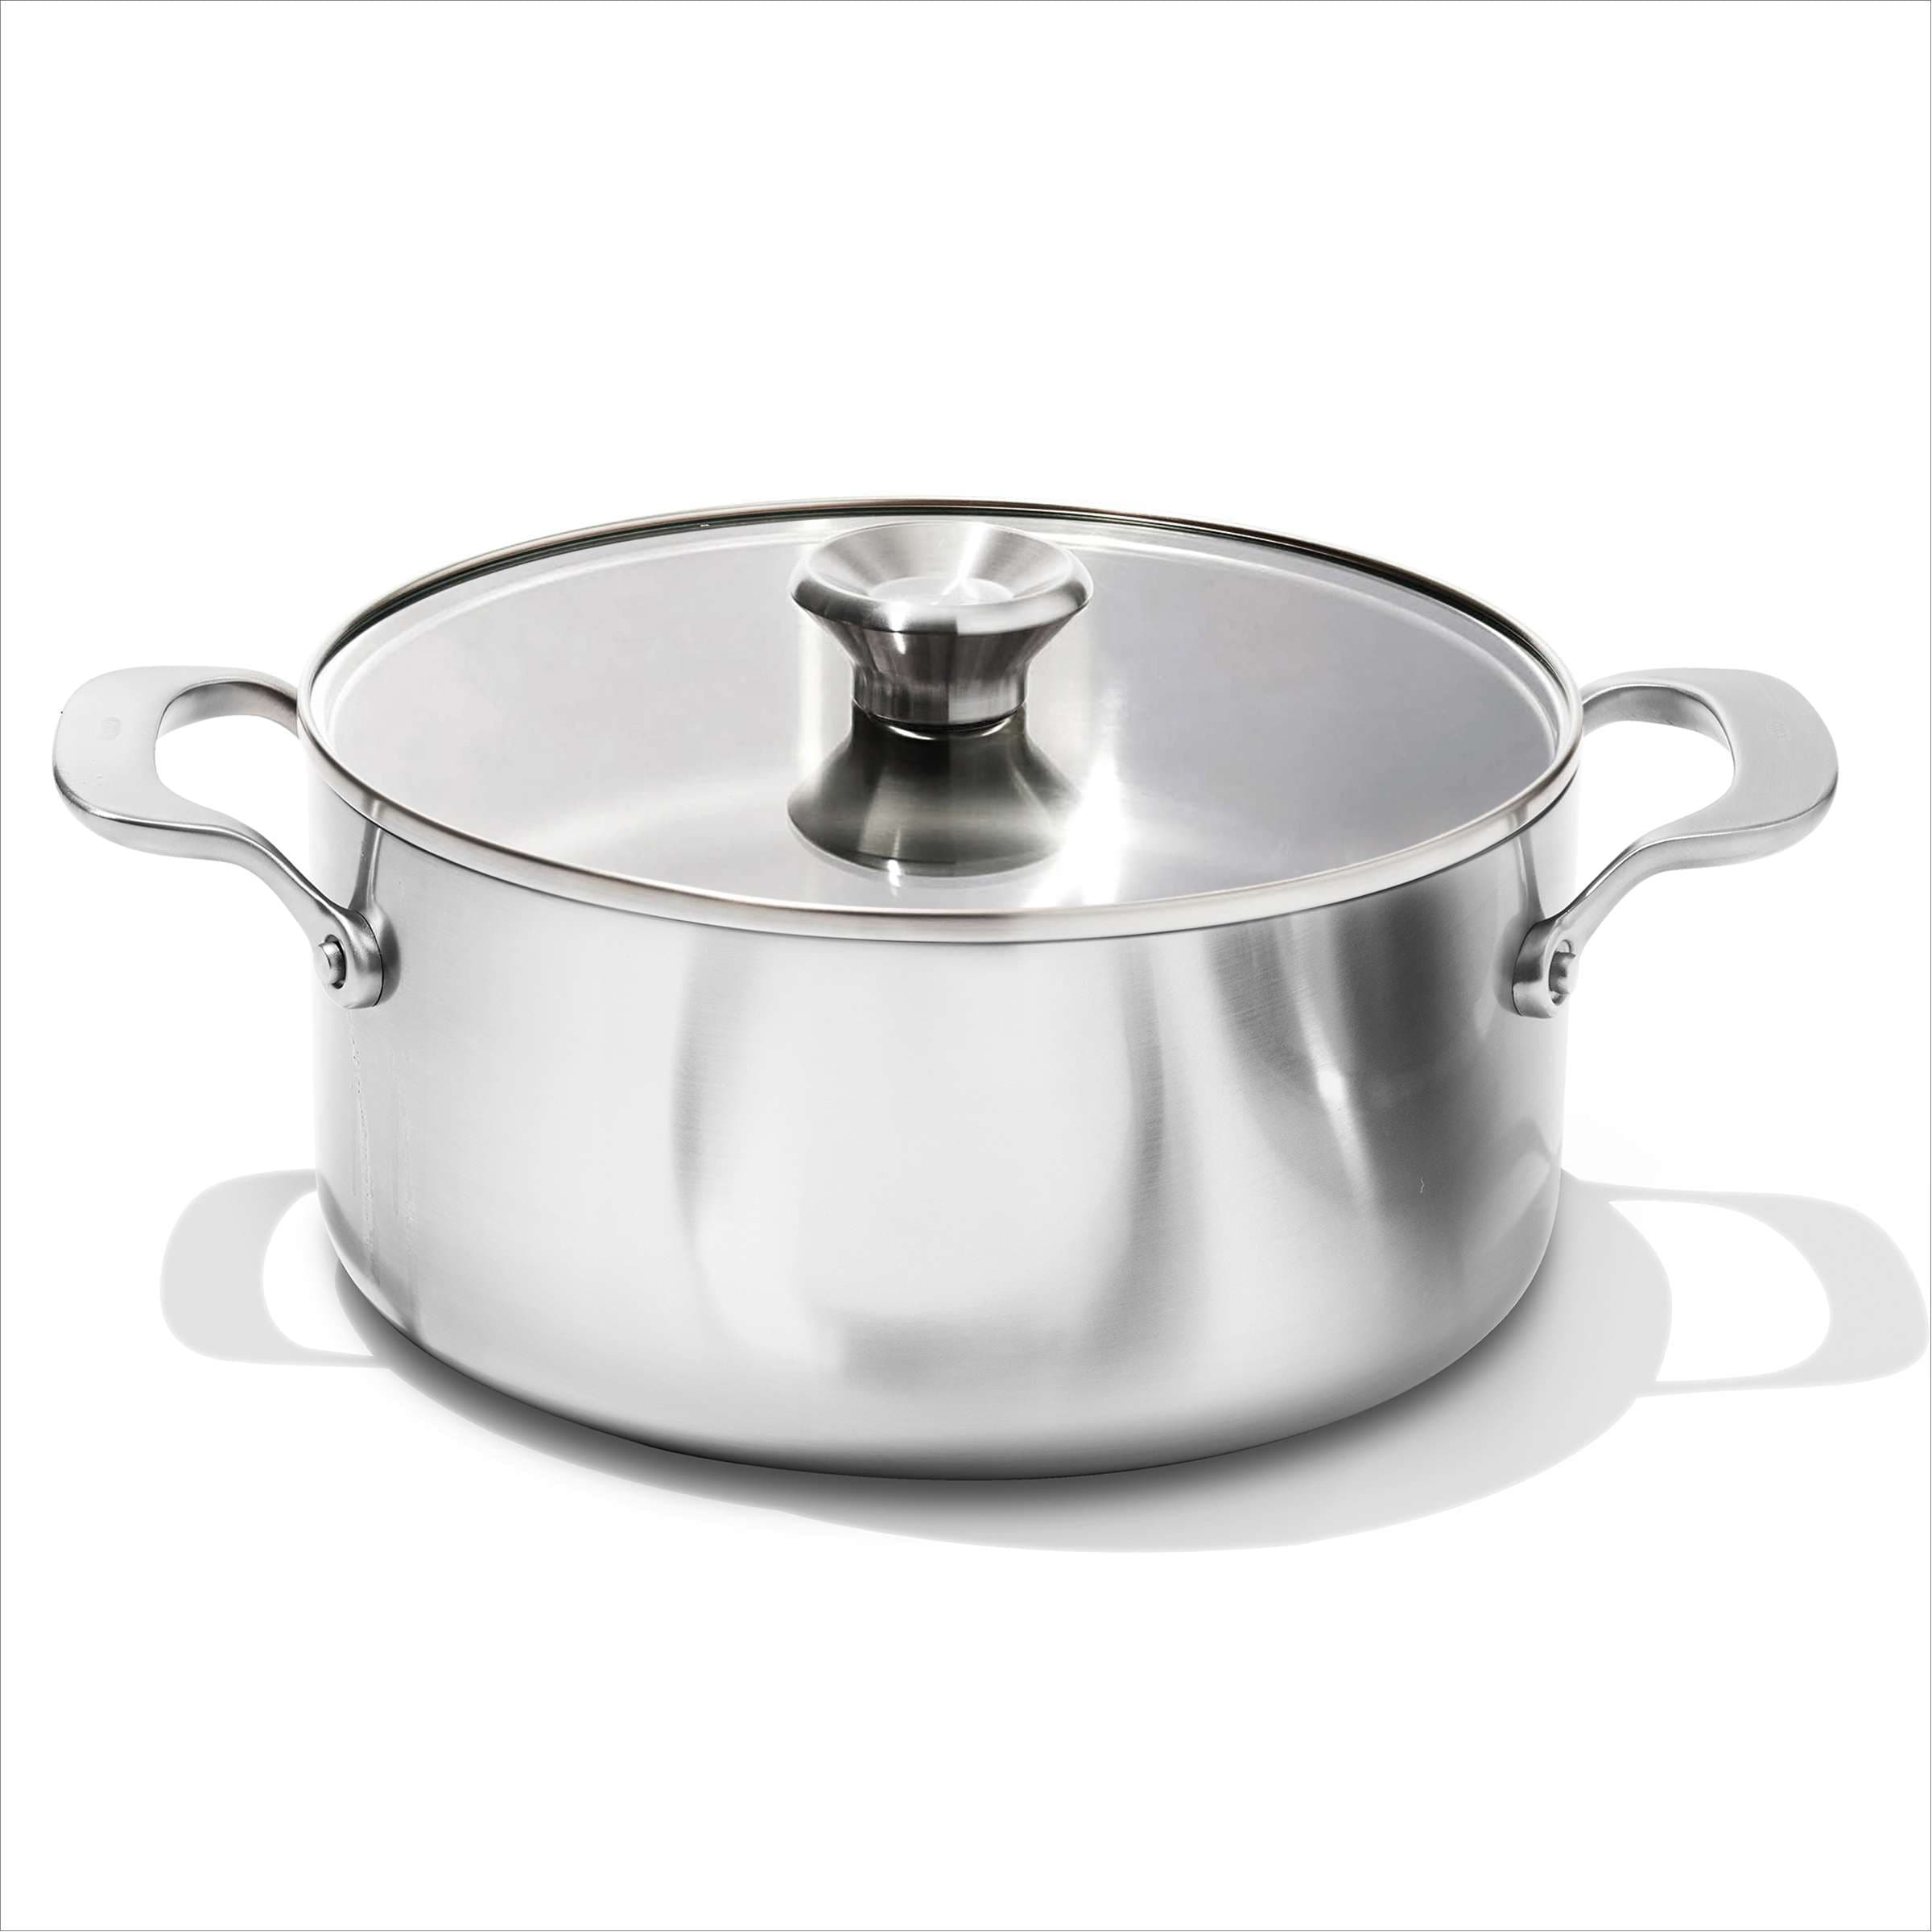 https://ak1.ostkcdn.com/images/products/is/images/direct/b0edf6577dde405f9c5def653d208c5febf005ca/OXO-Mira-3-Ply-Stainless-Steel-Stock-Pot-with-Lid%2C-5-Qt.jpg